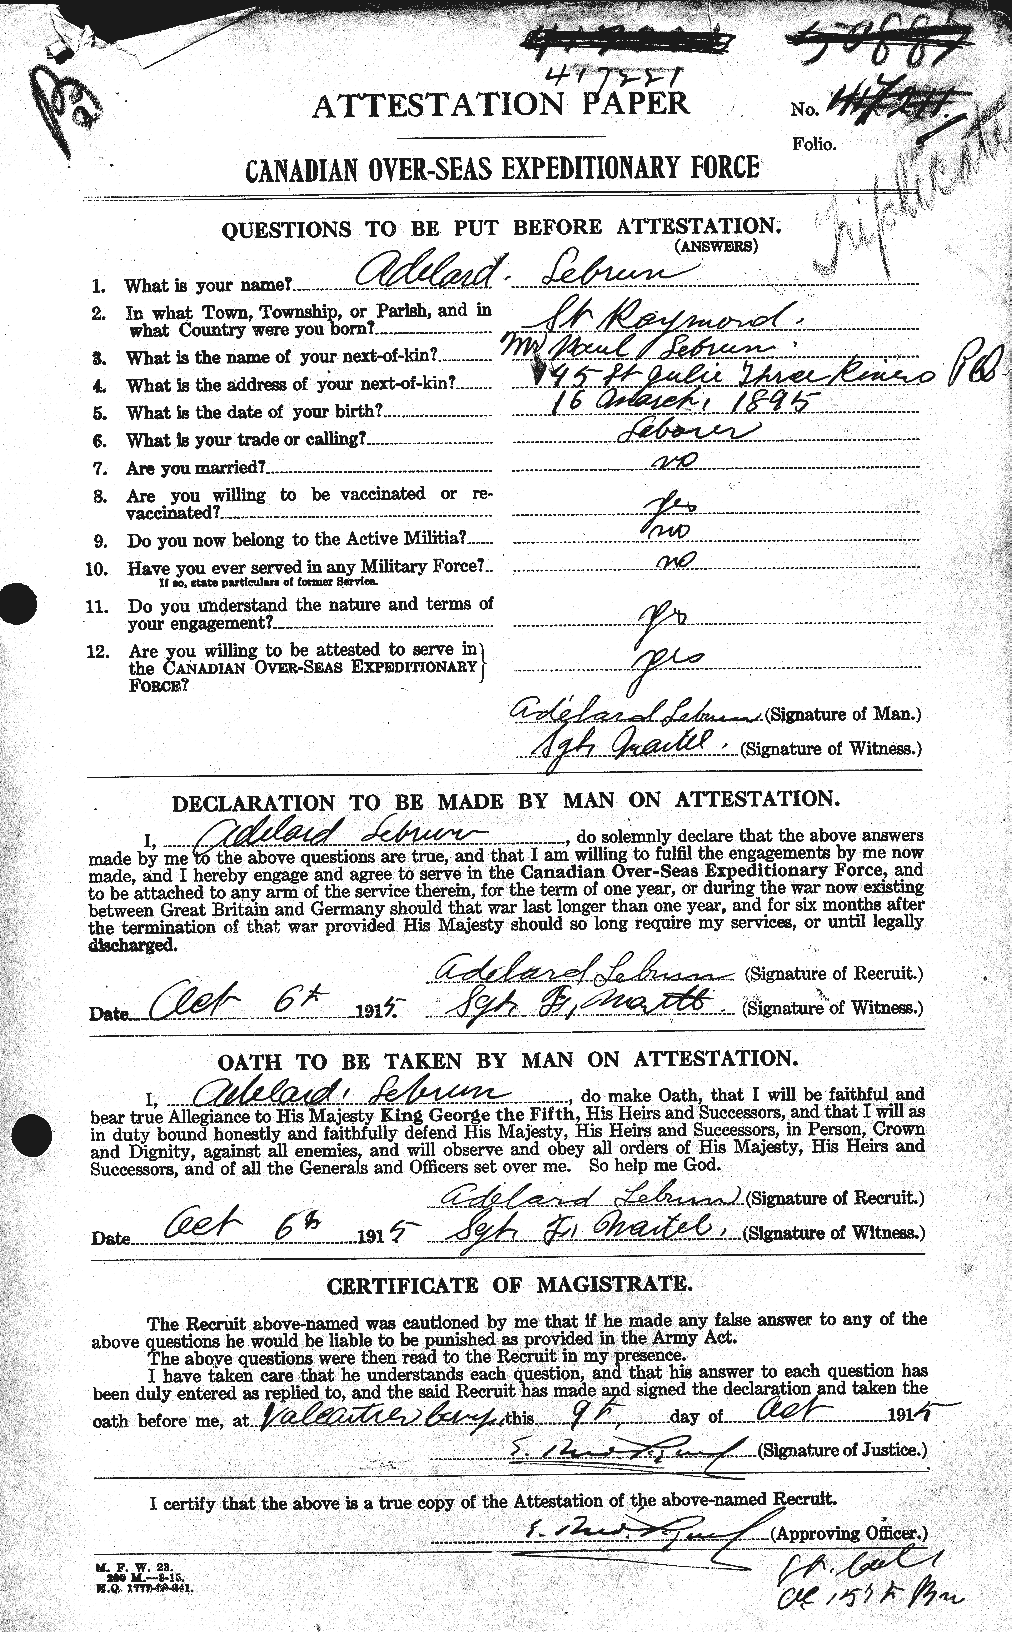 Personnel Records of the First World War - CEF 461542a